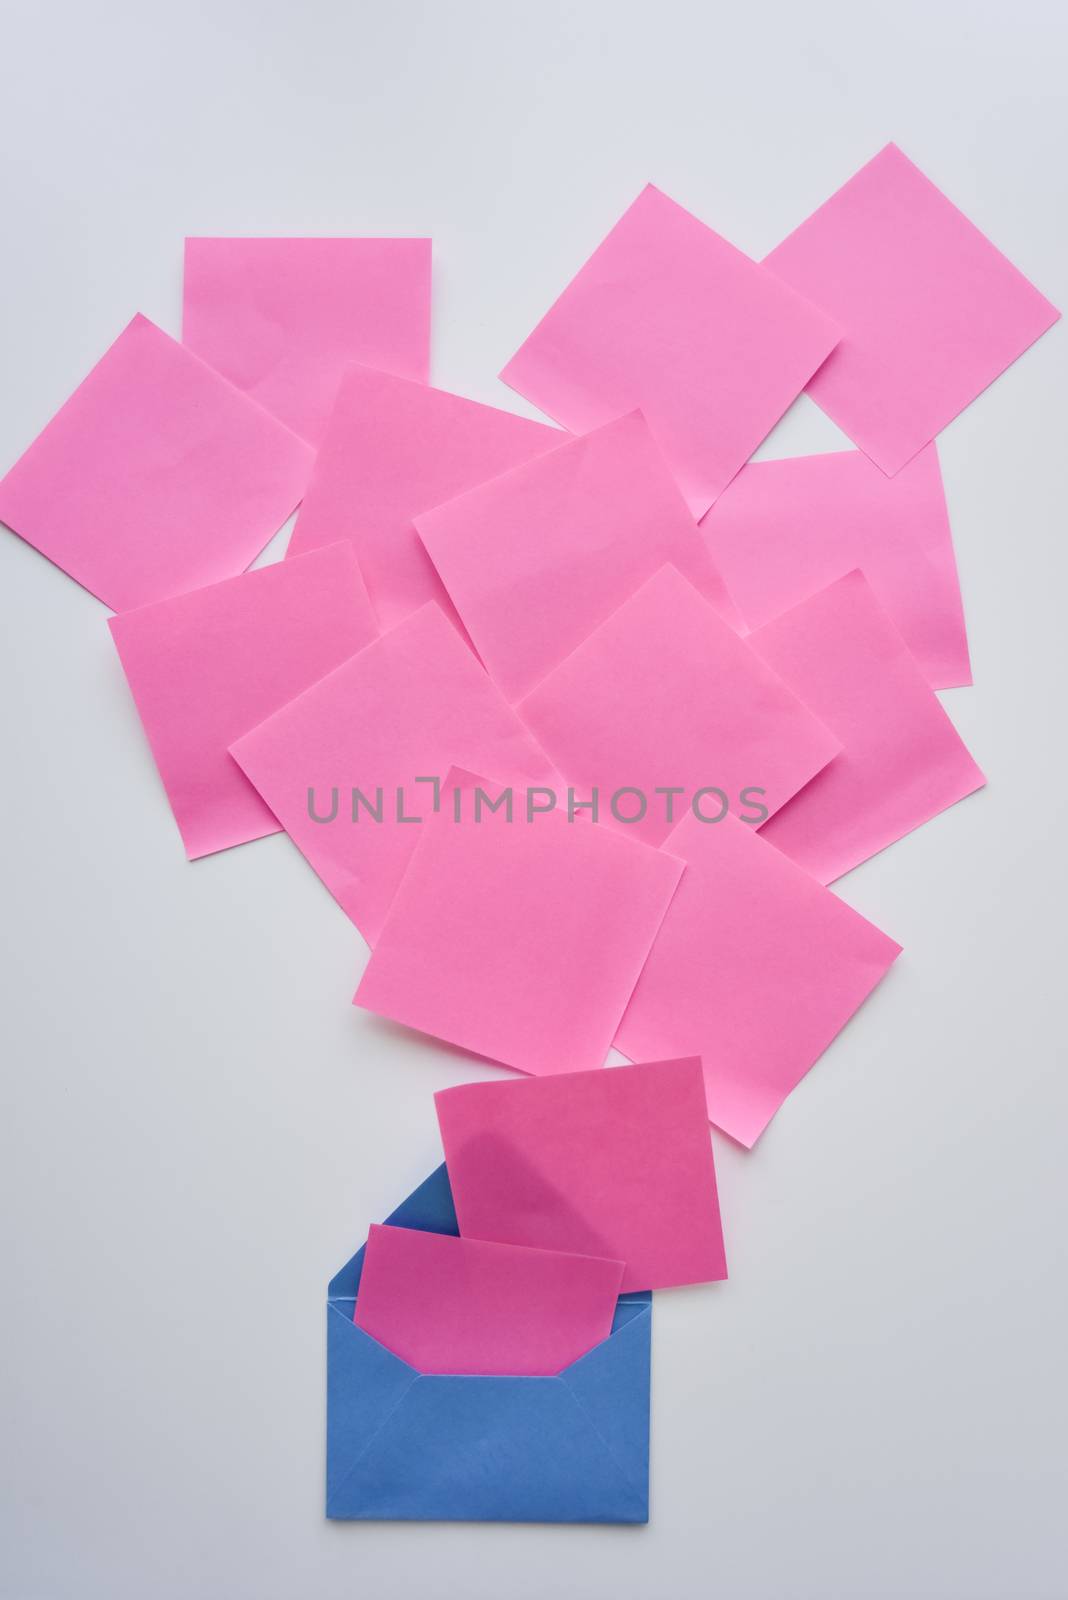 selective focus, pink paper stickers in chaos and blue envelope down on the white background